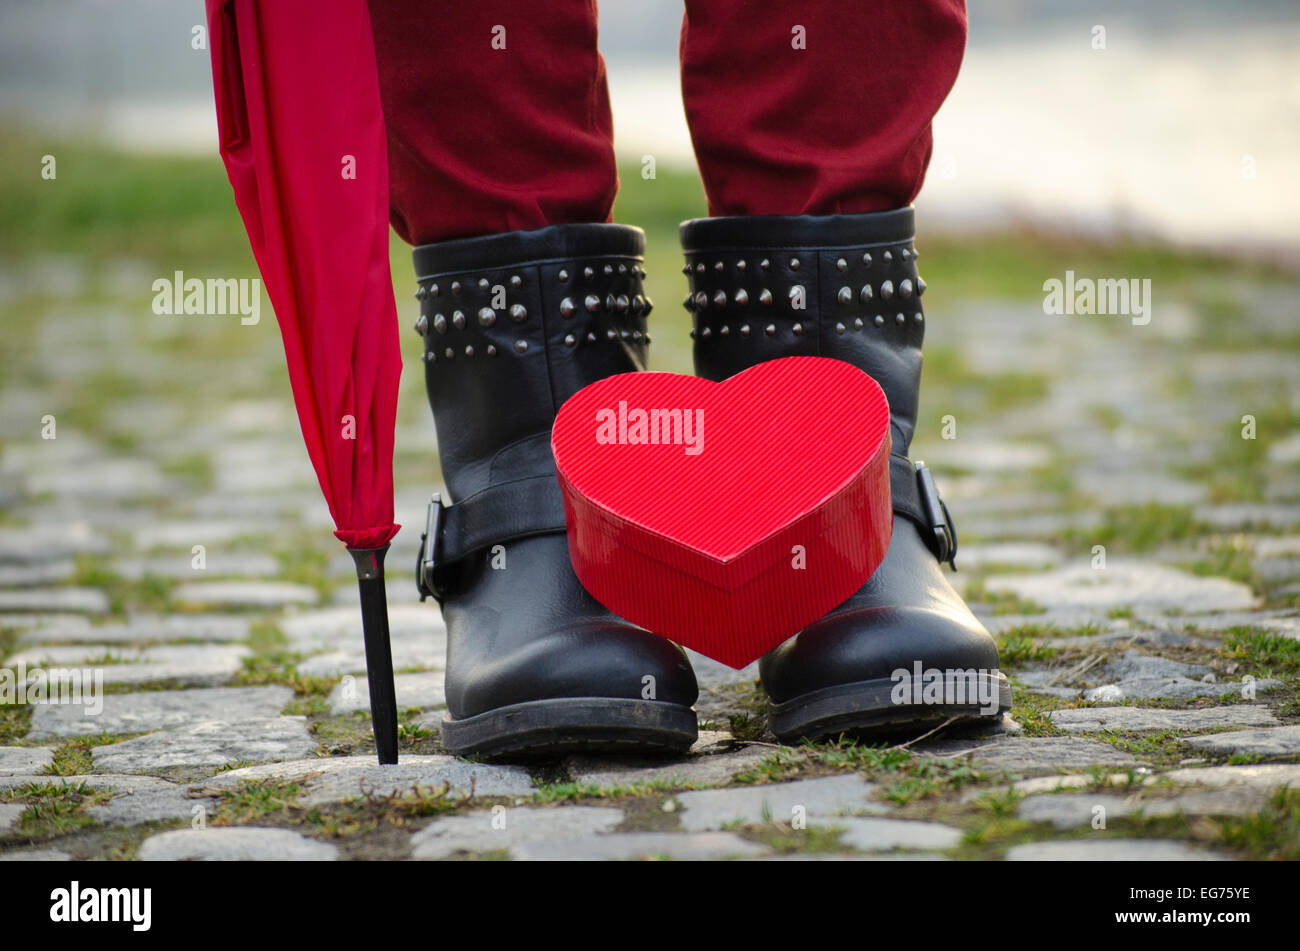 Heart shaped box standing on girl's boots outdoors Stock Photo